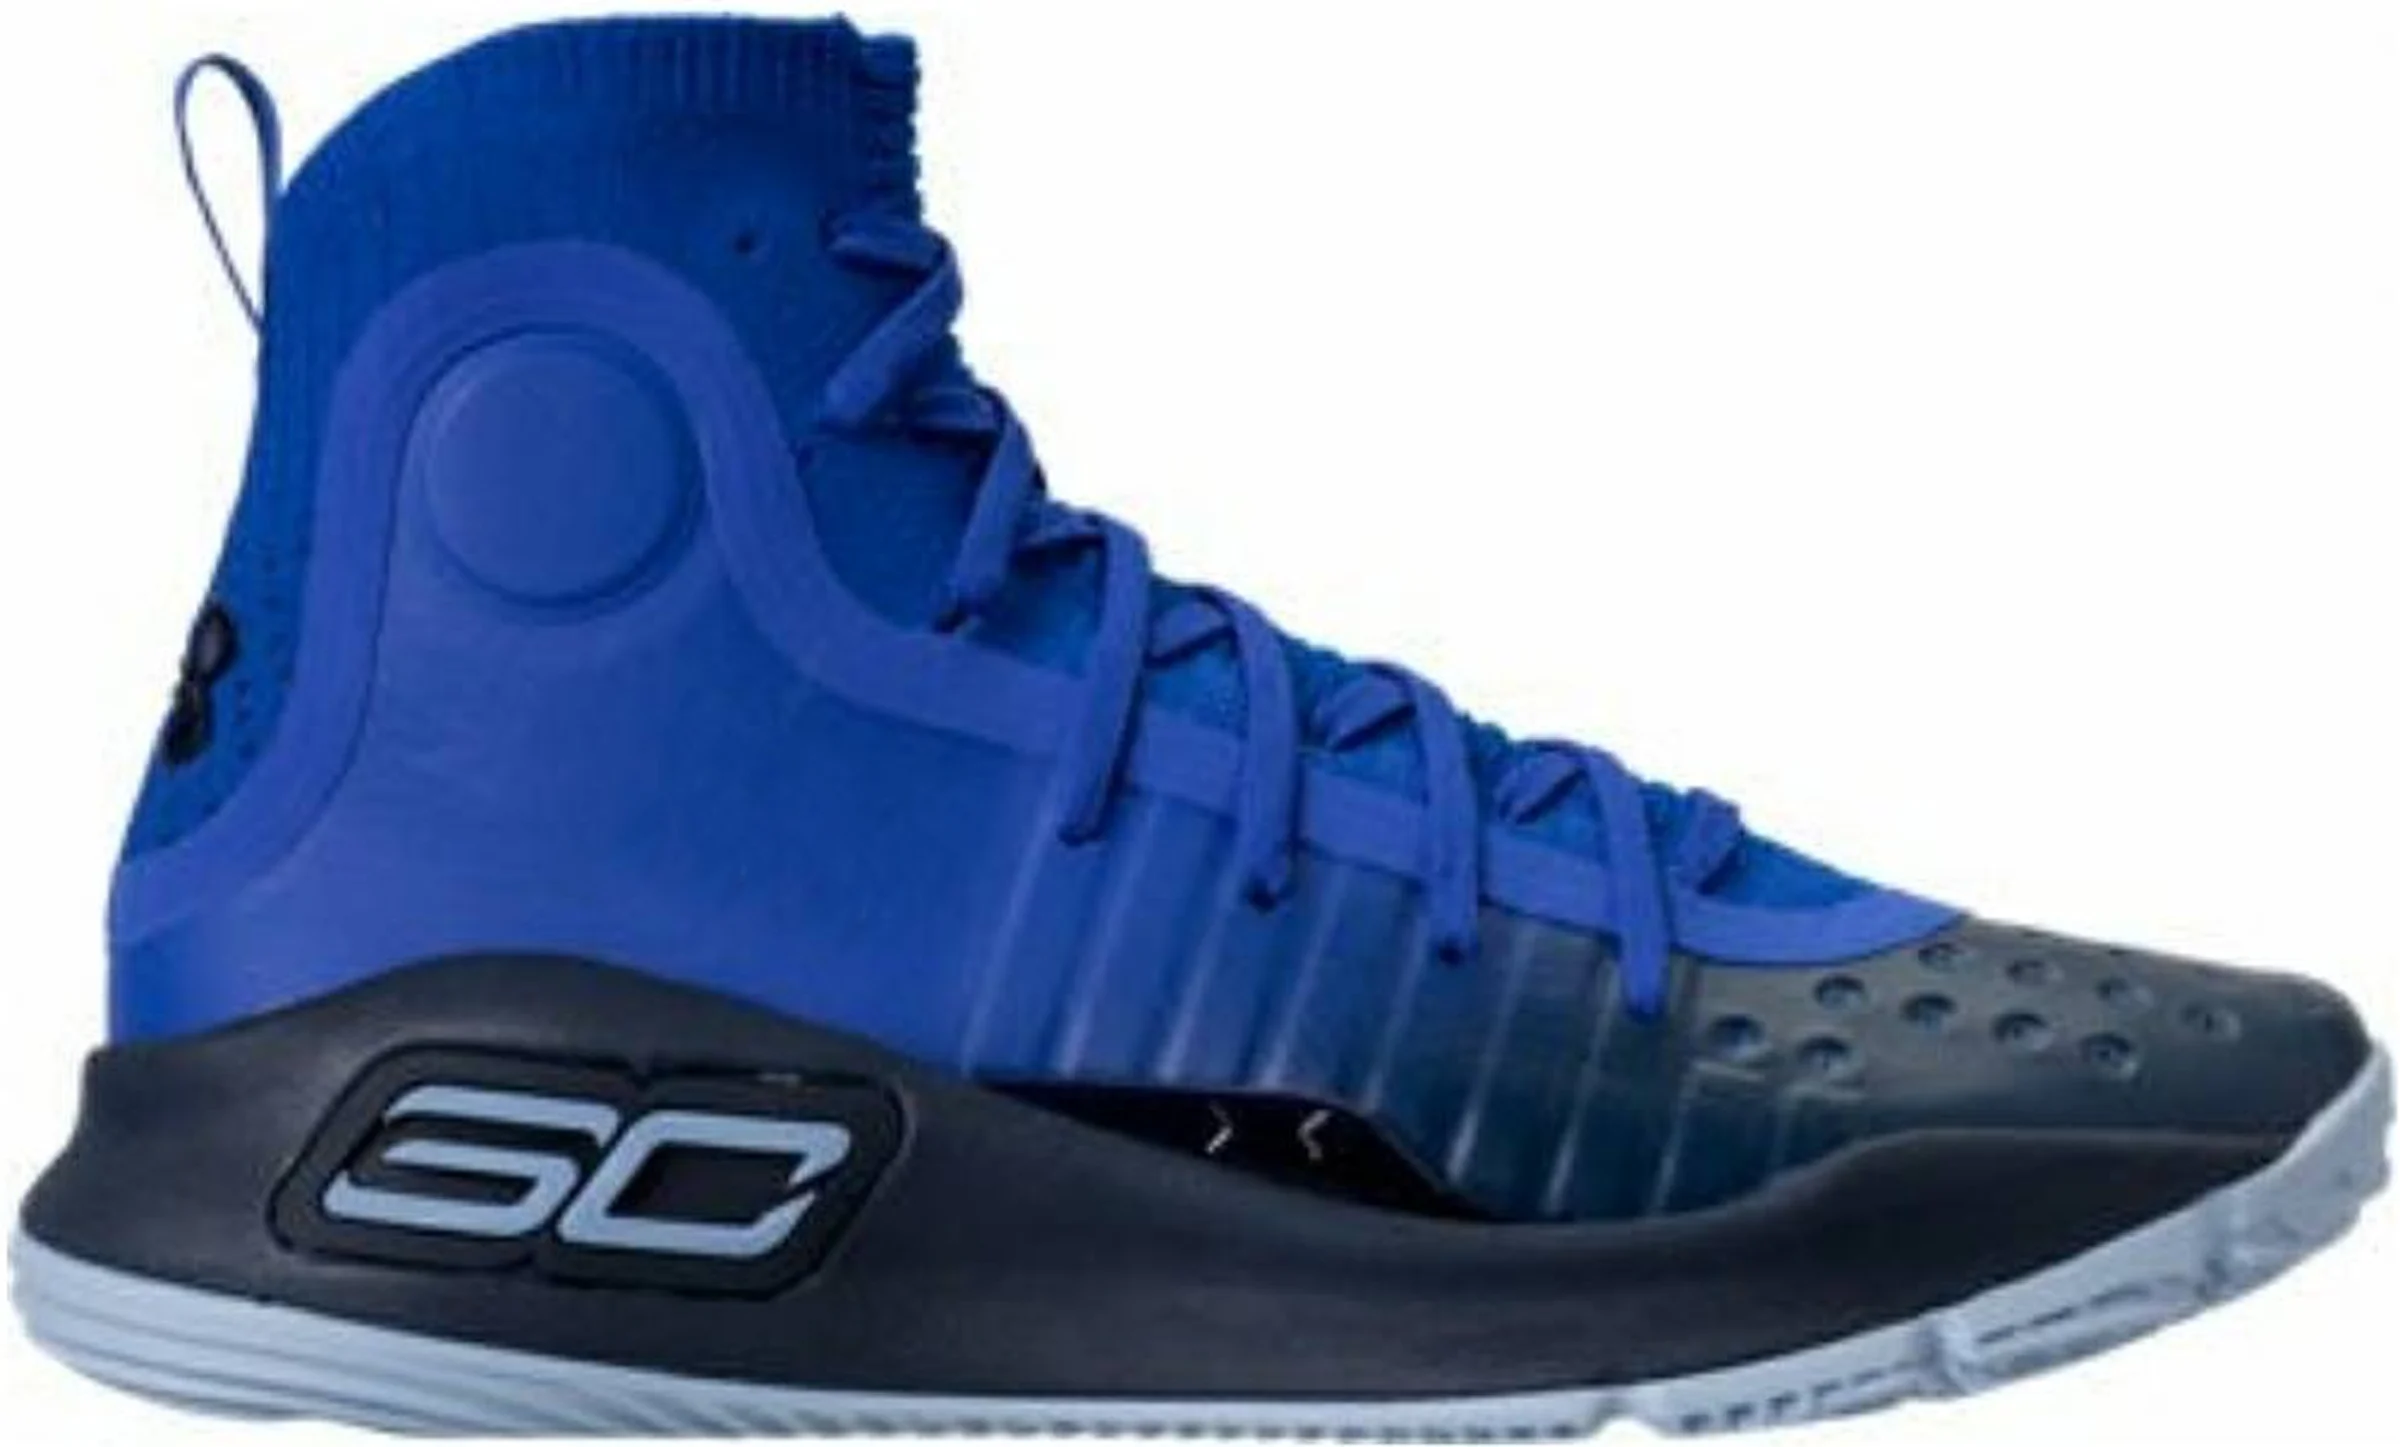 Under armor curry 4 basket ball shoes